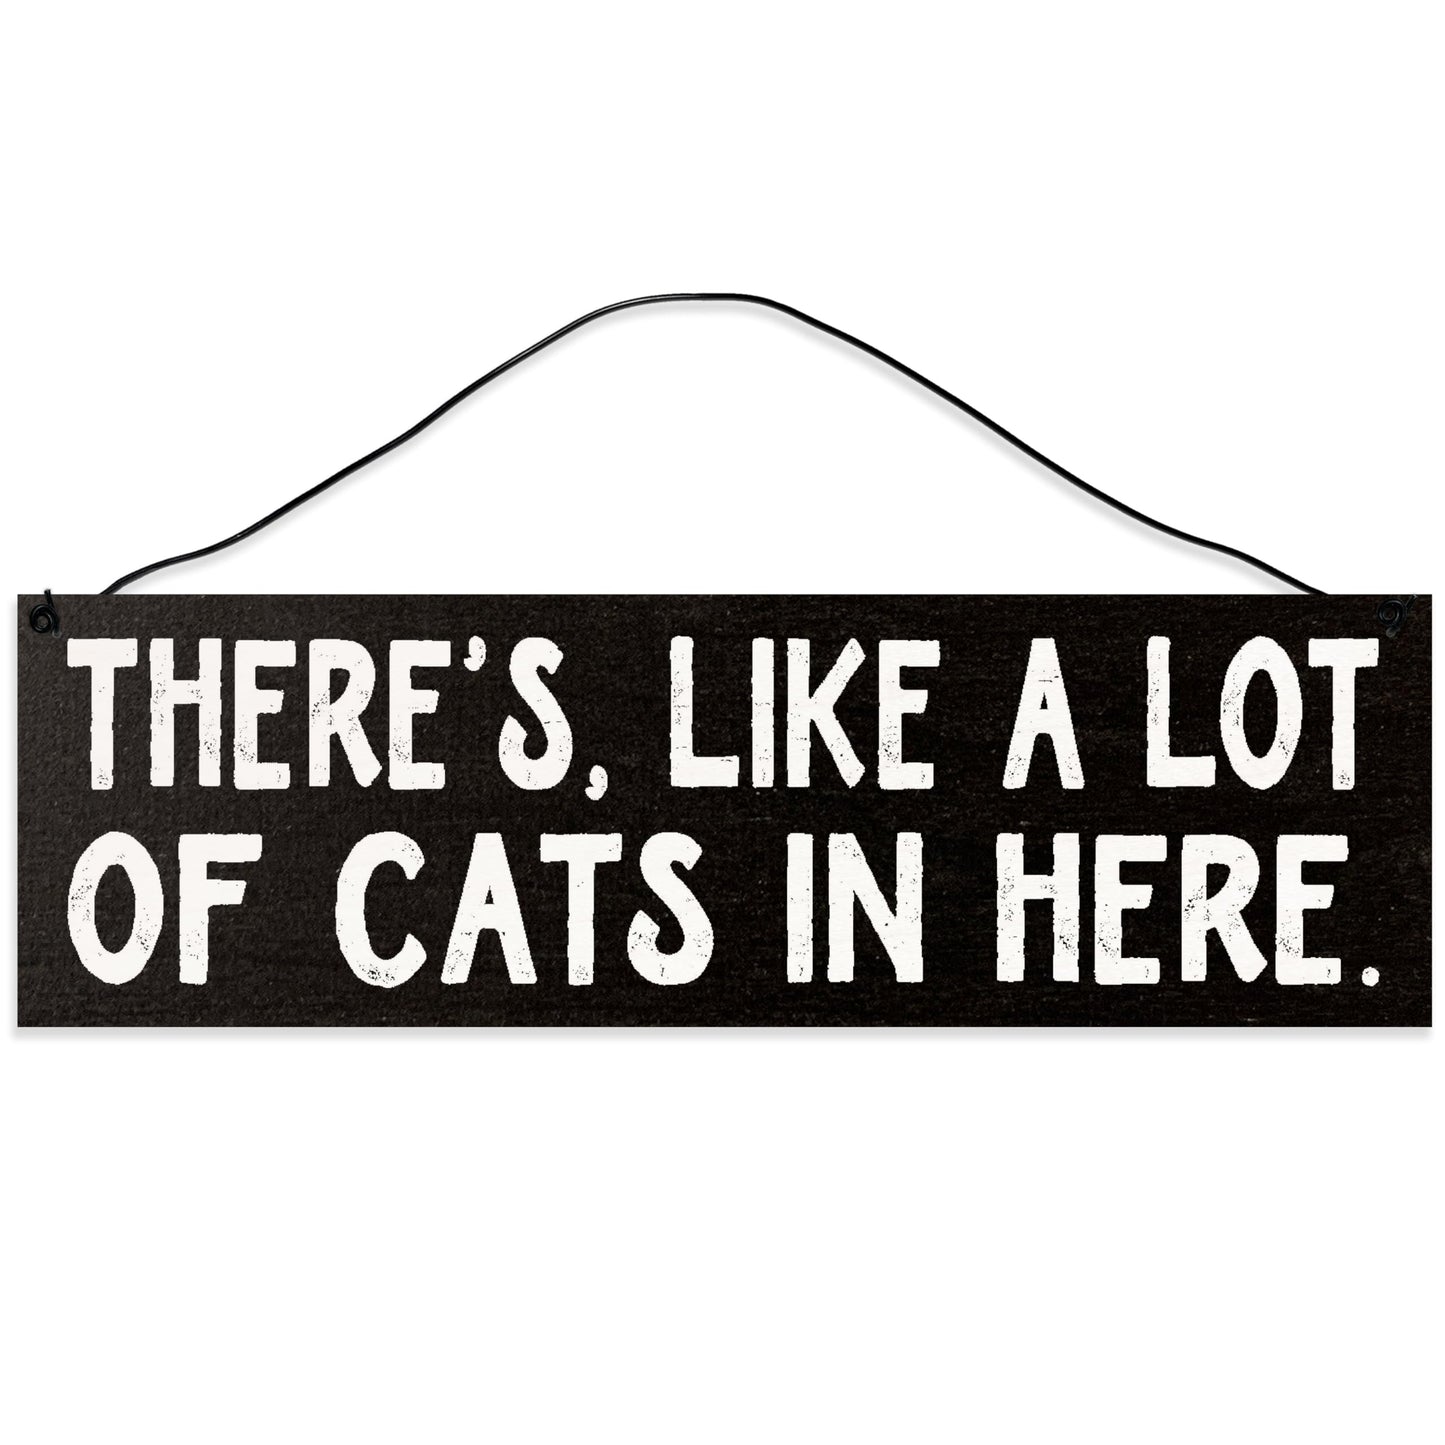 Lot of Cats | Handmade | Wood Sign | Wire Hanger/Stand | UV Printed | Solid Maple